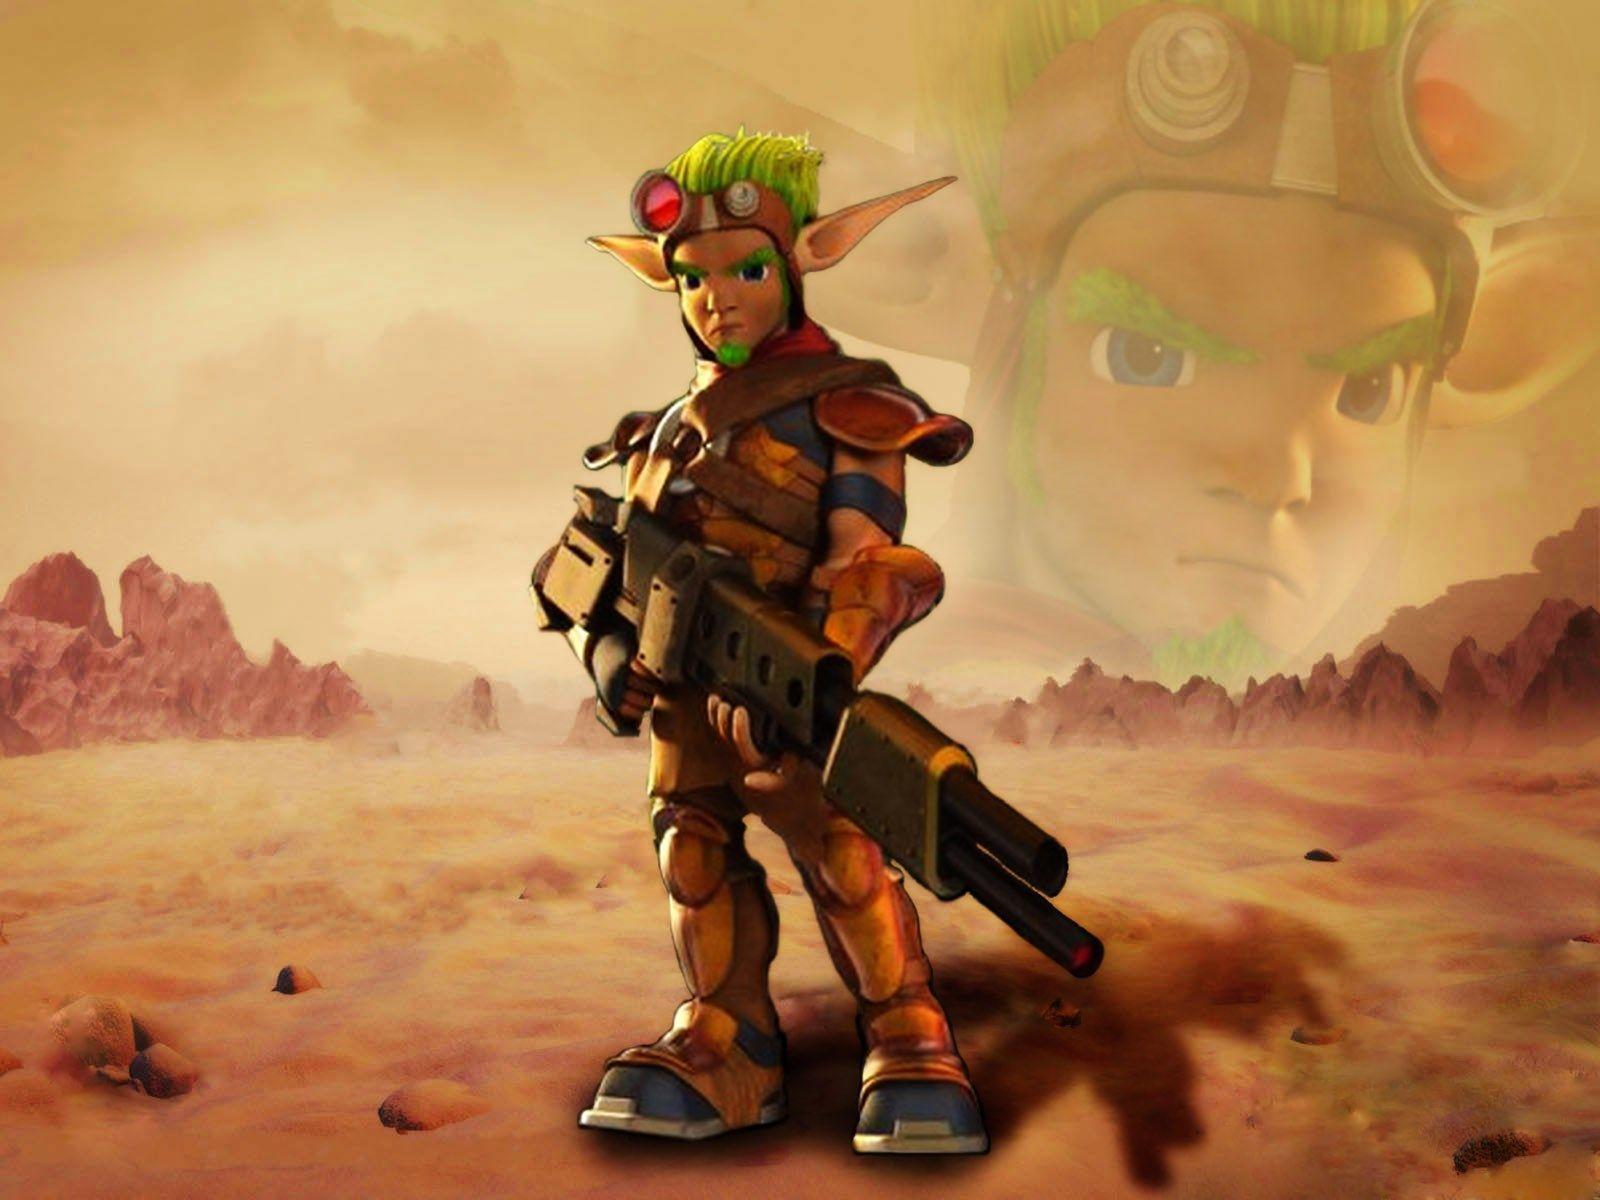 jak and daxter wallpaper 1920x1080 Wallppapers Gallery